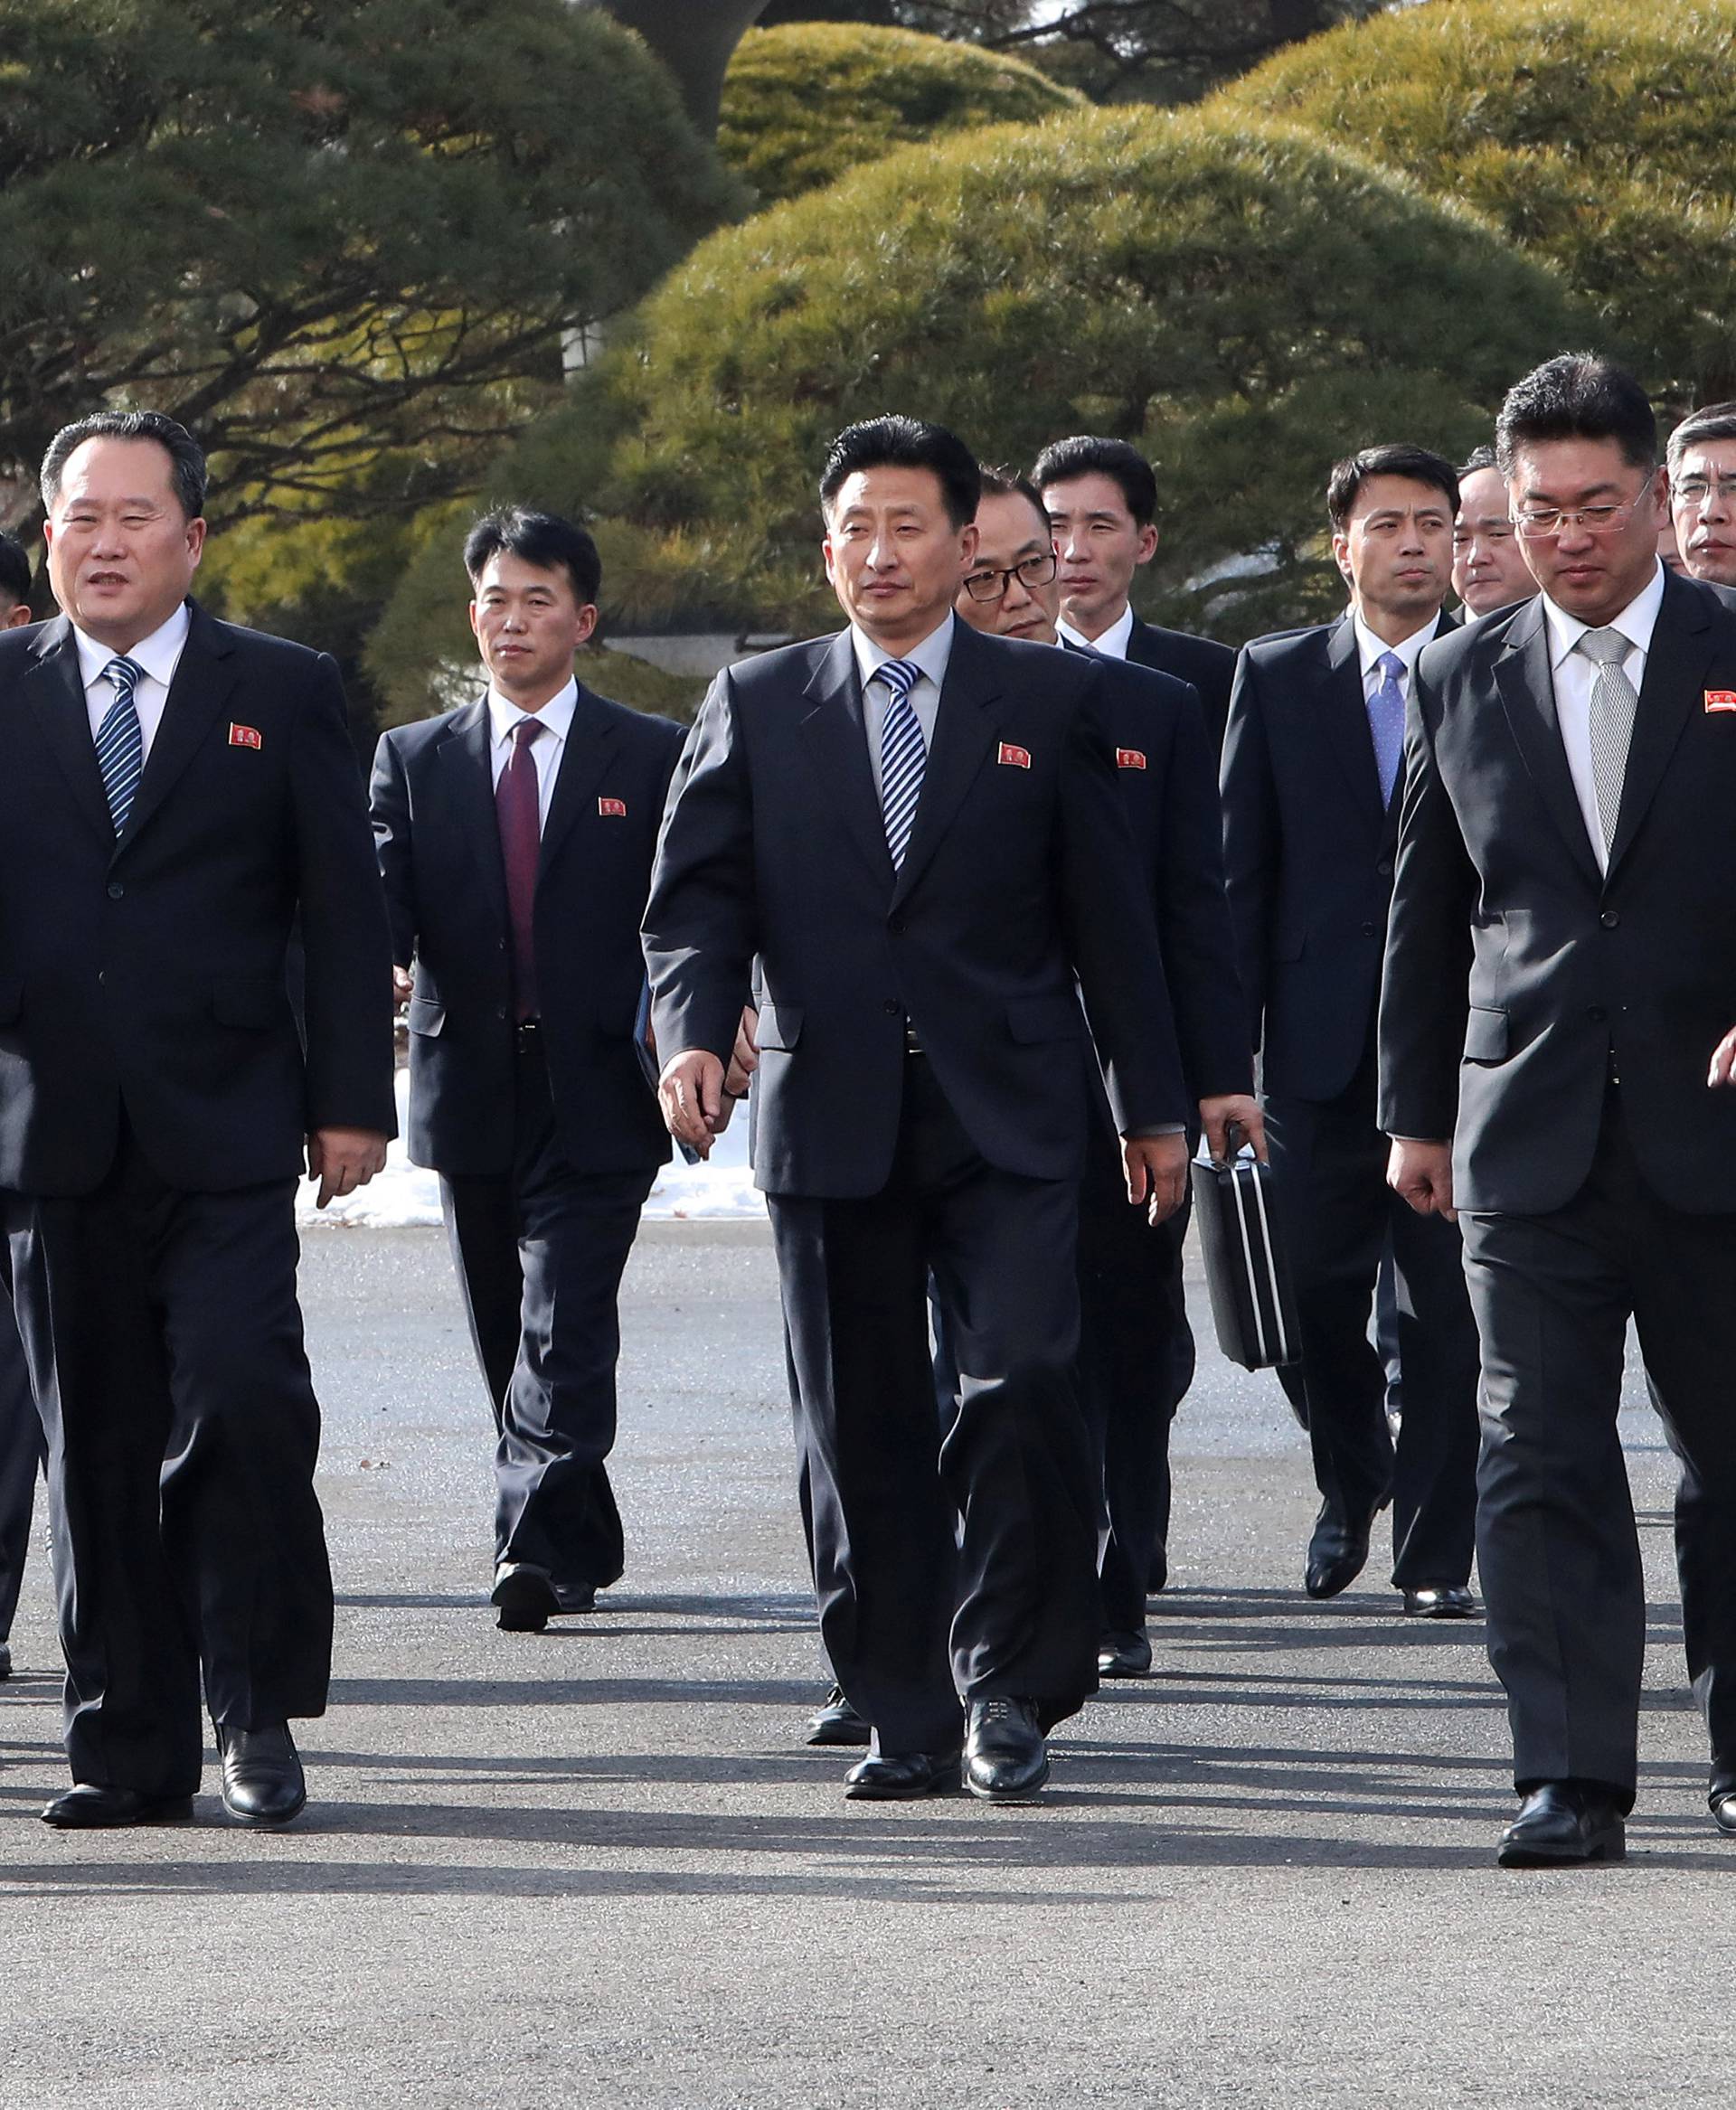 North Korean delegation led by Ri Son Gwon, Chairman of the Committee for the Peaceful Reunification of the Country (CPRC) of DPRK, leave after their meeting at the truce village of Panmunjom